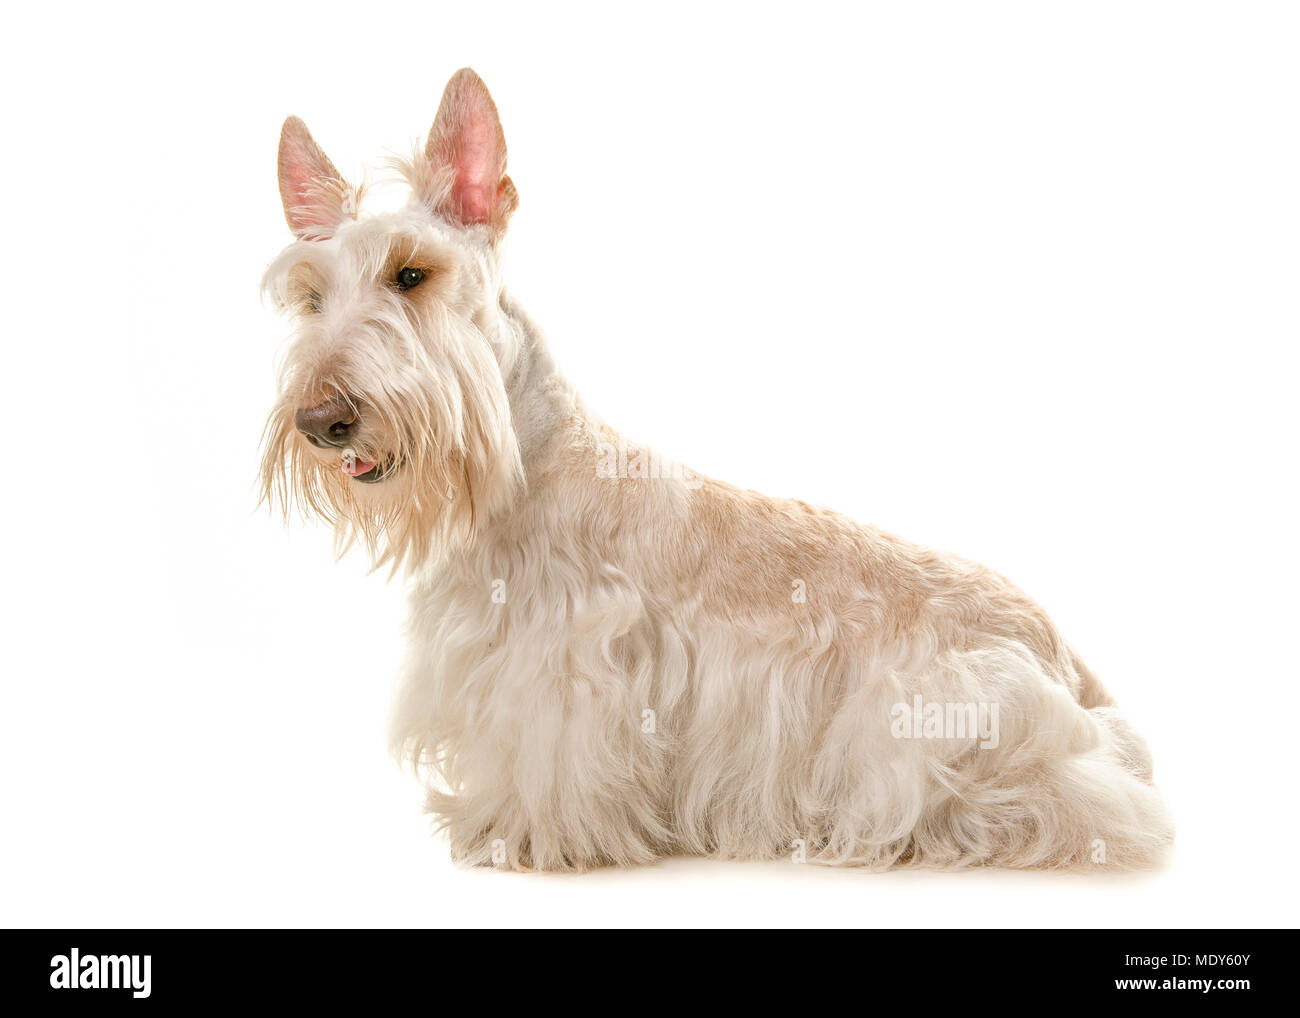 White scottisch terrier dog seen from the side isolated on a white background Stock Photo